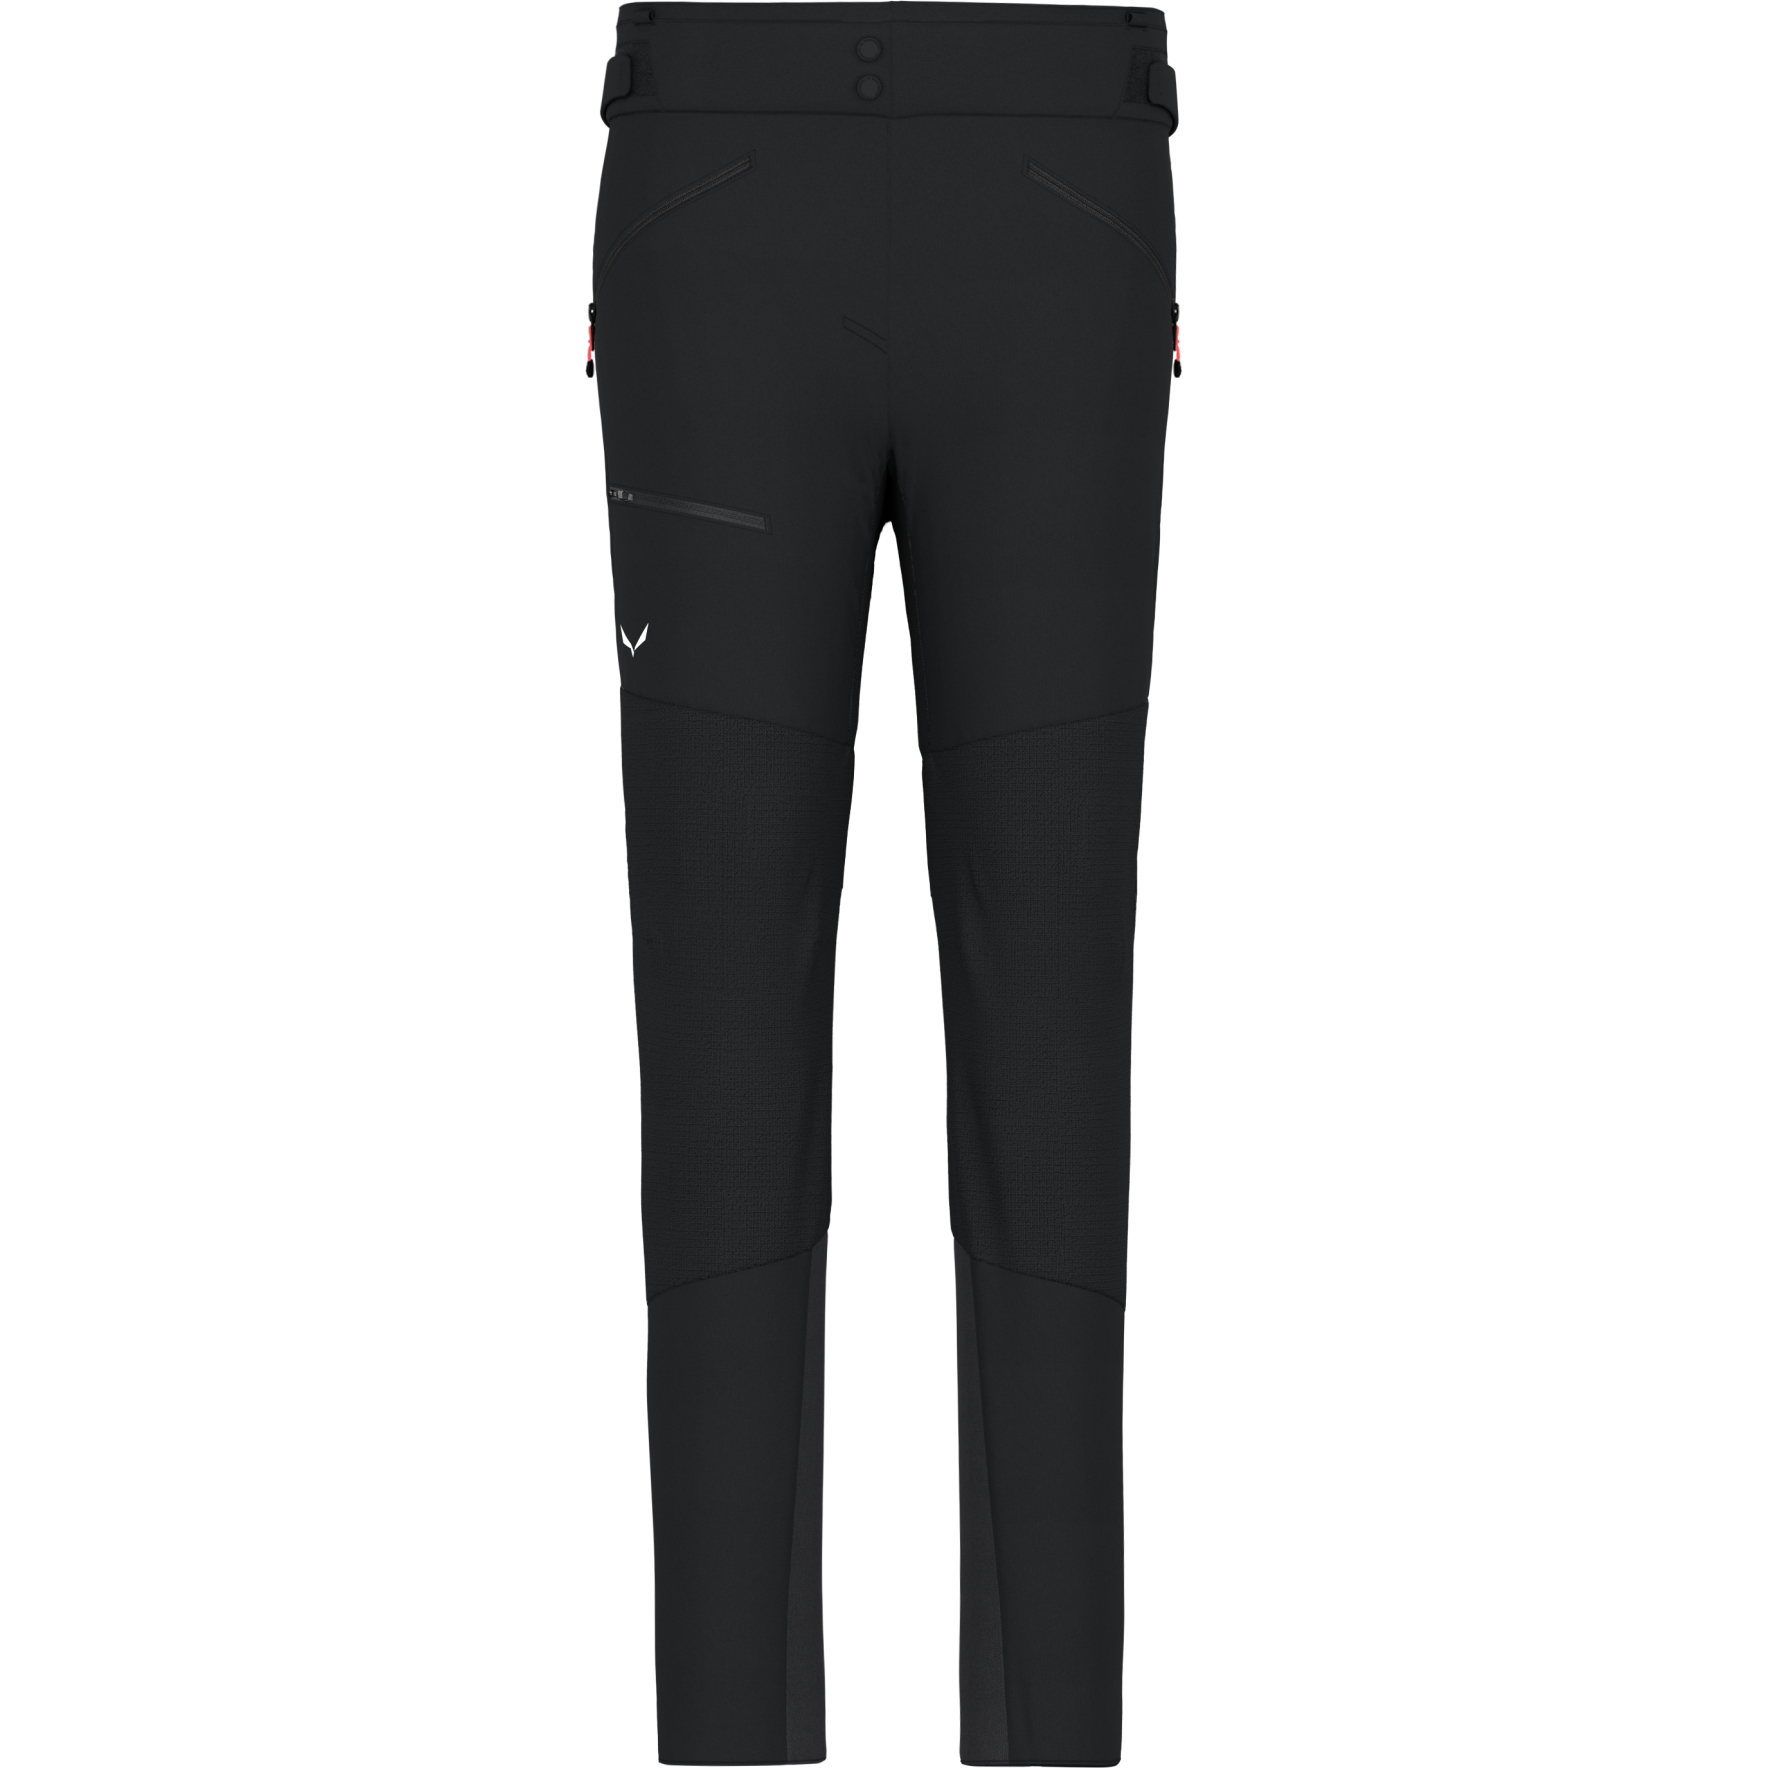 Image of Salewa Ortles Durastretch Pants Women - black out 910